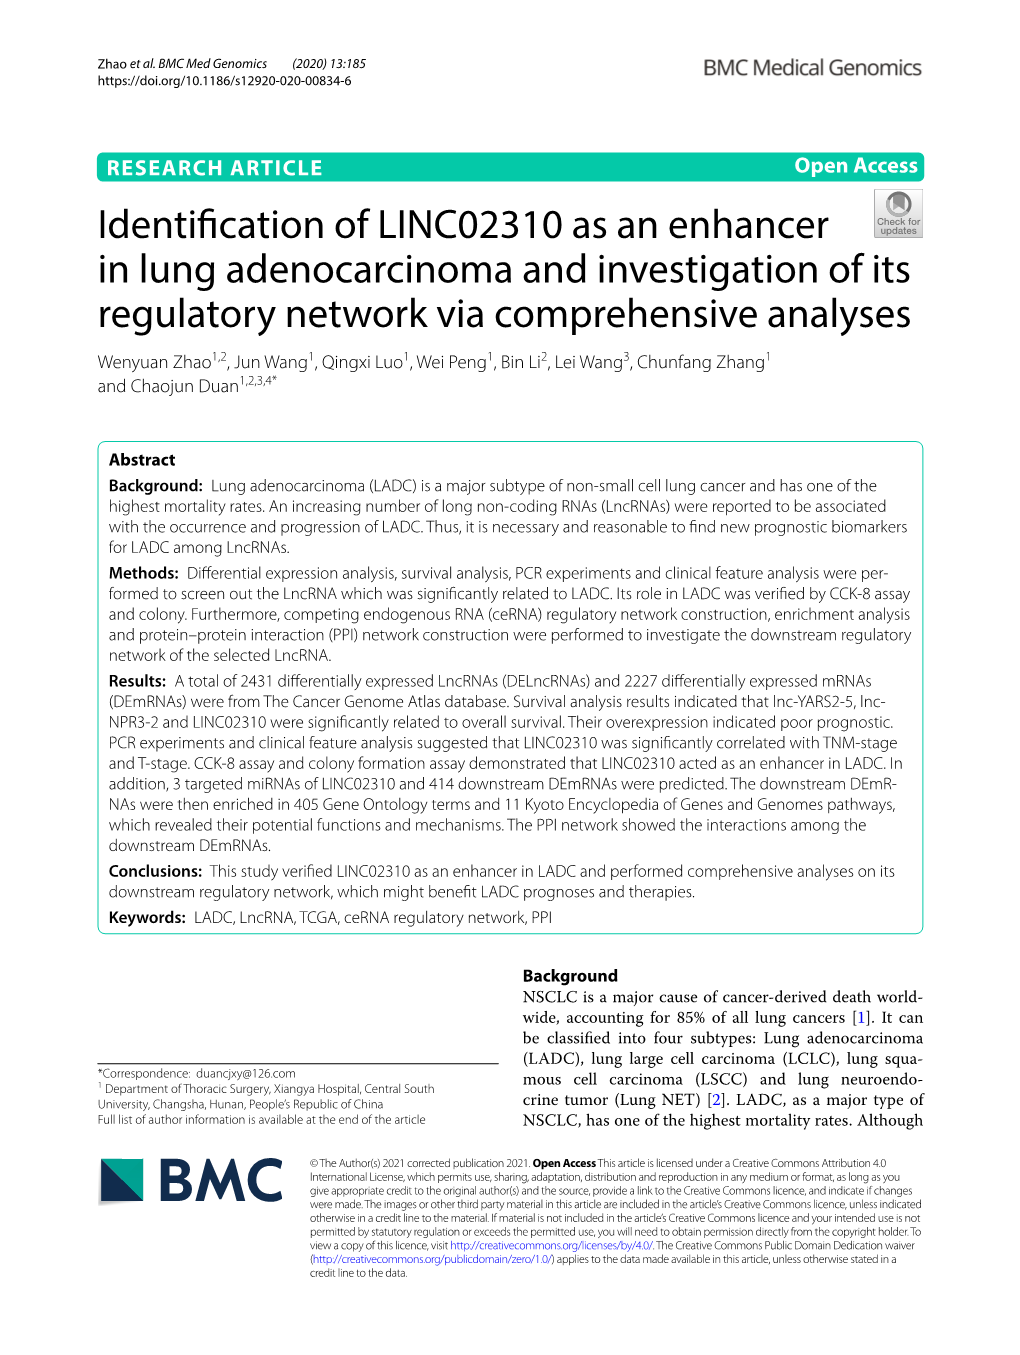 Identification of LINC02310 As an Enhancer in Lung Adenocarcinoma